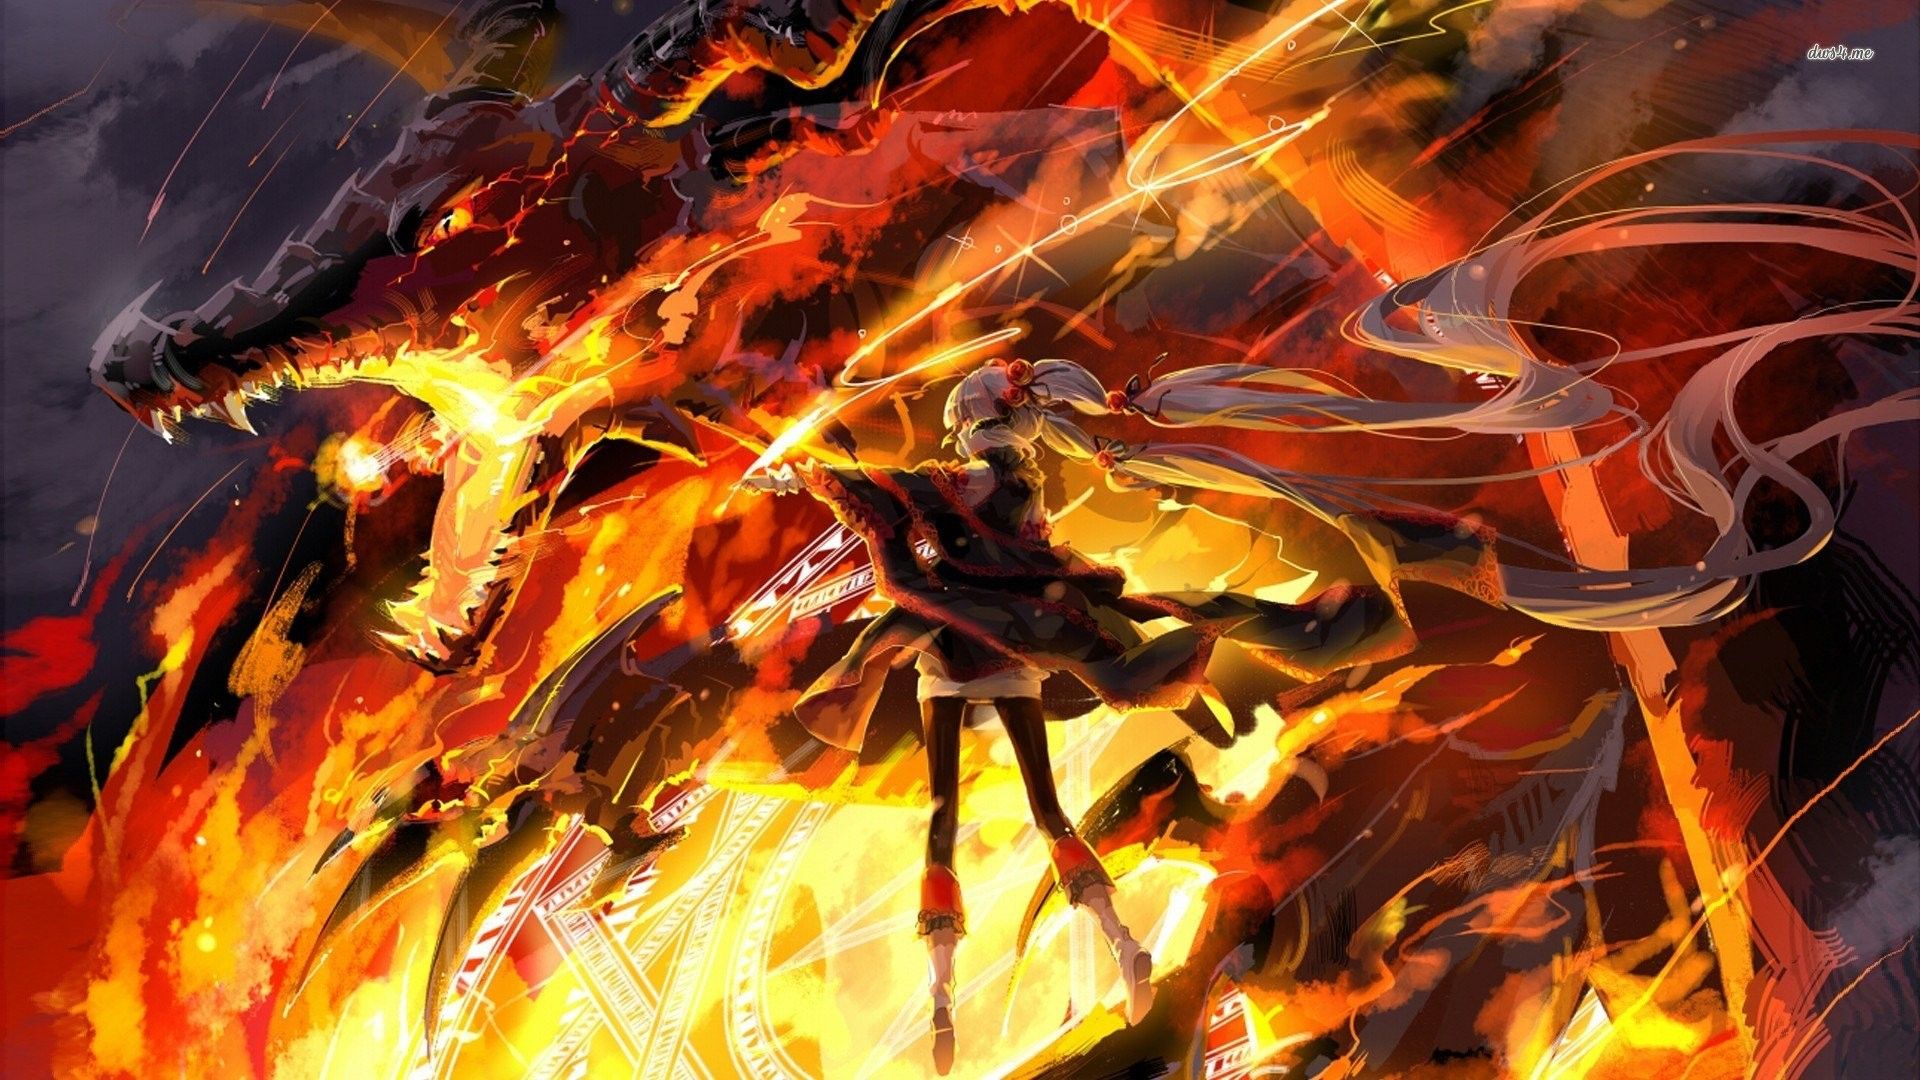 100+] Anime Fire Wallpapers